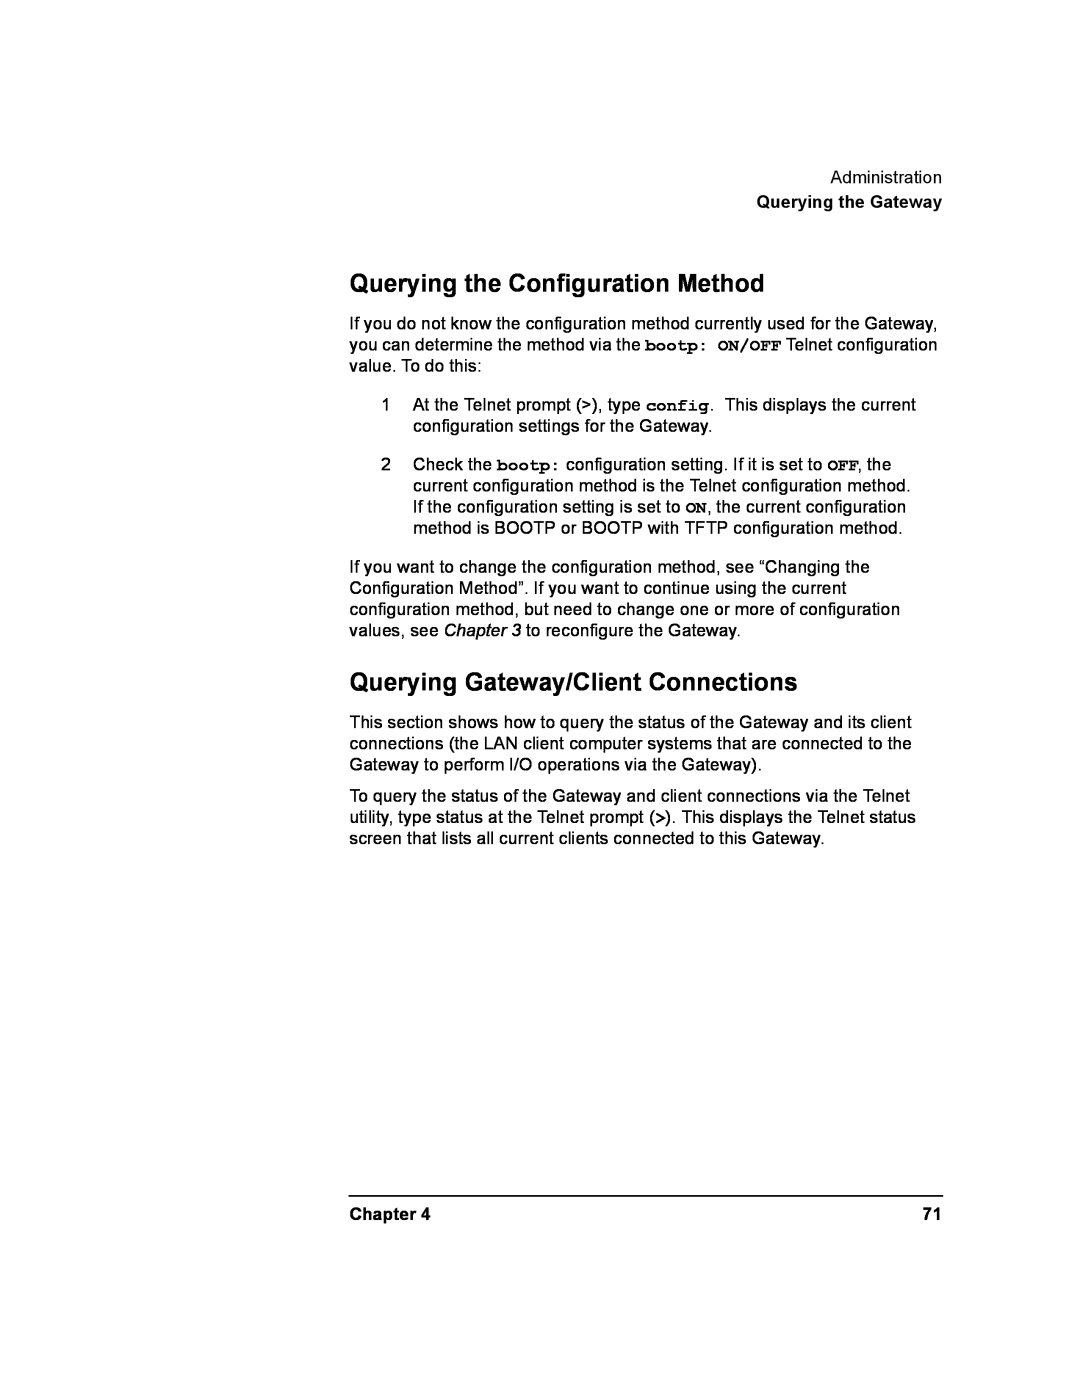 Agilent Technologies E2050-90003 manual Querying the Configuration Method, Querying Gateway/Client Connections, Chapter 